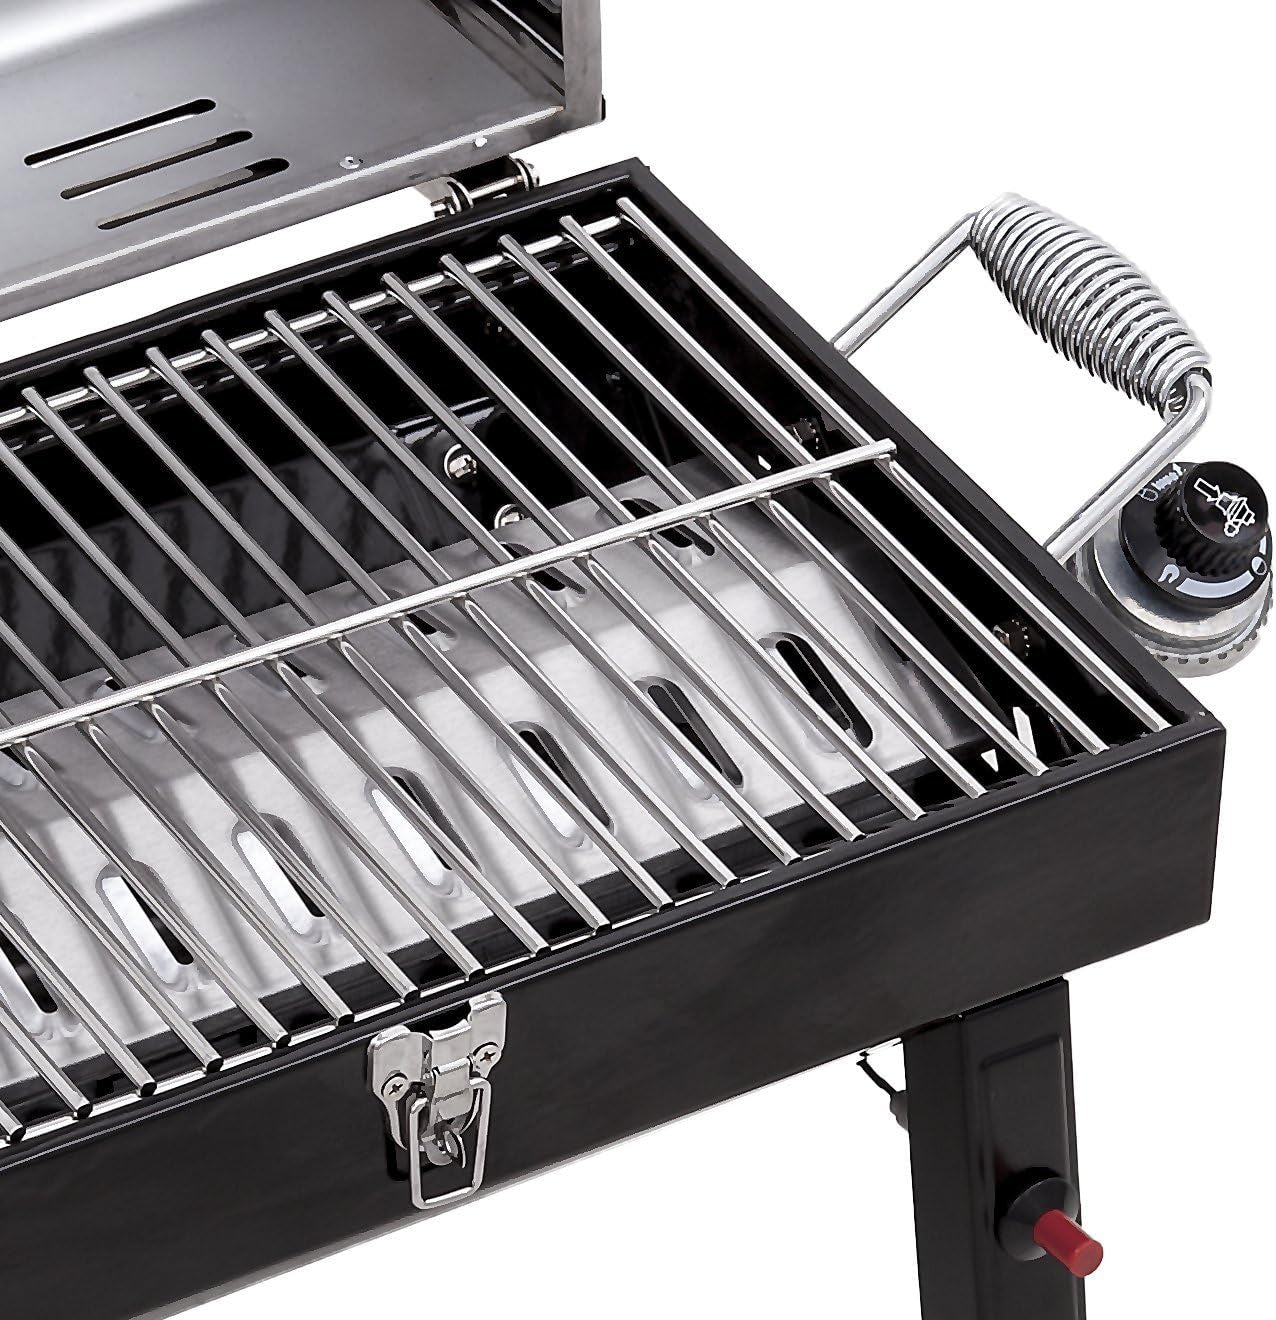 Stainless Steel Portable Liquid Propane Gas Grill